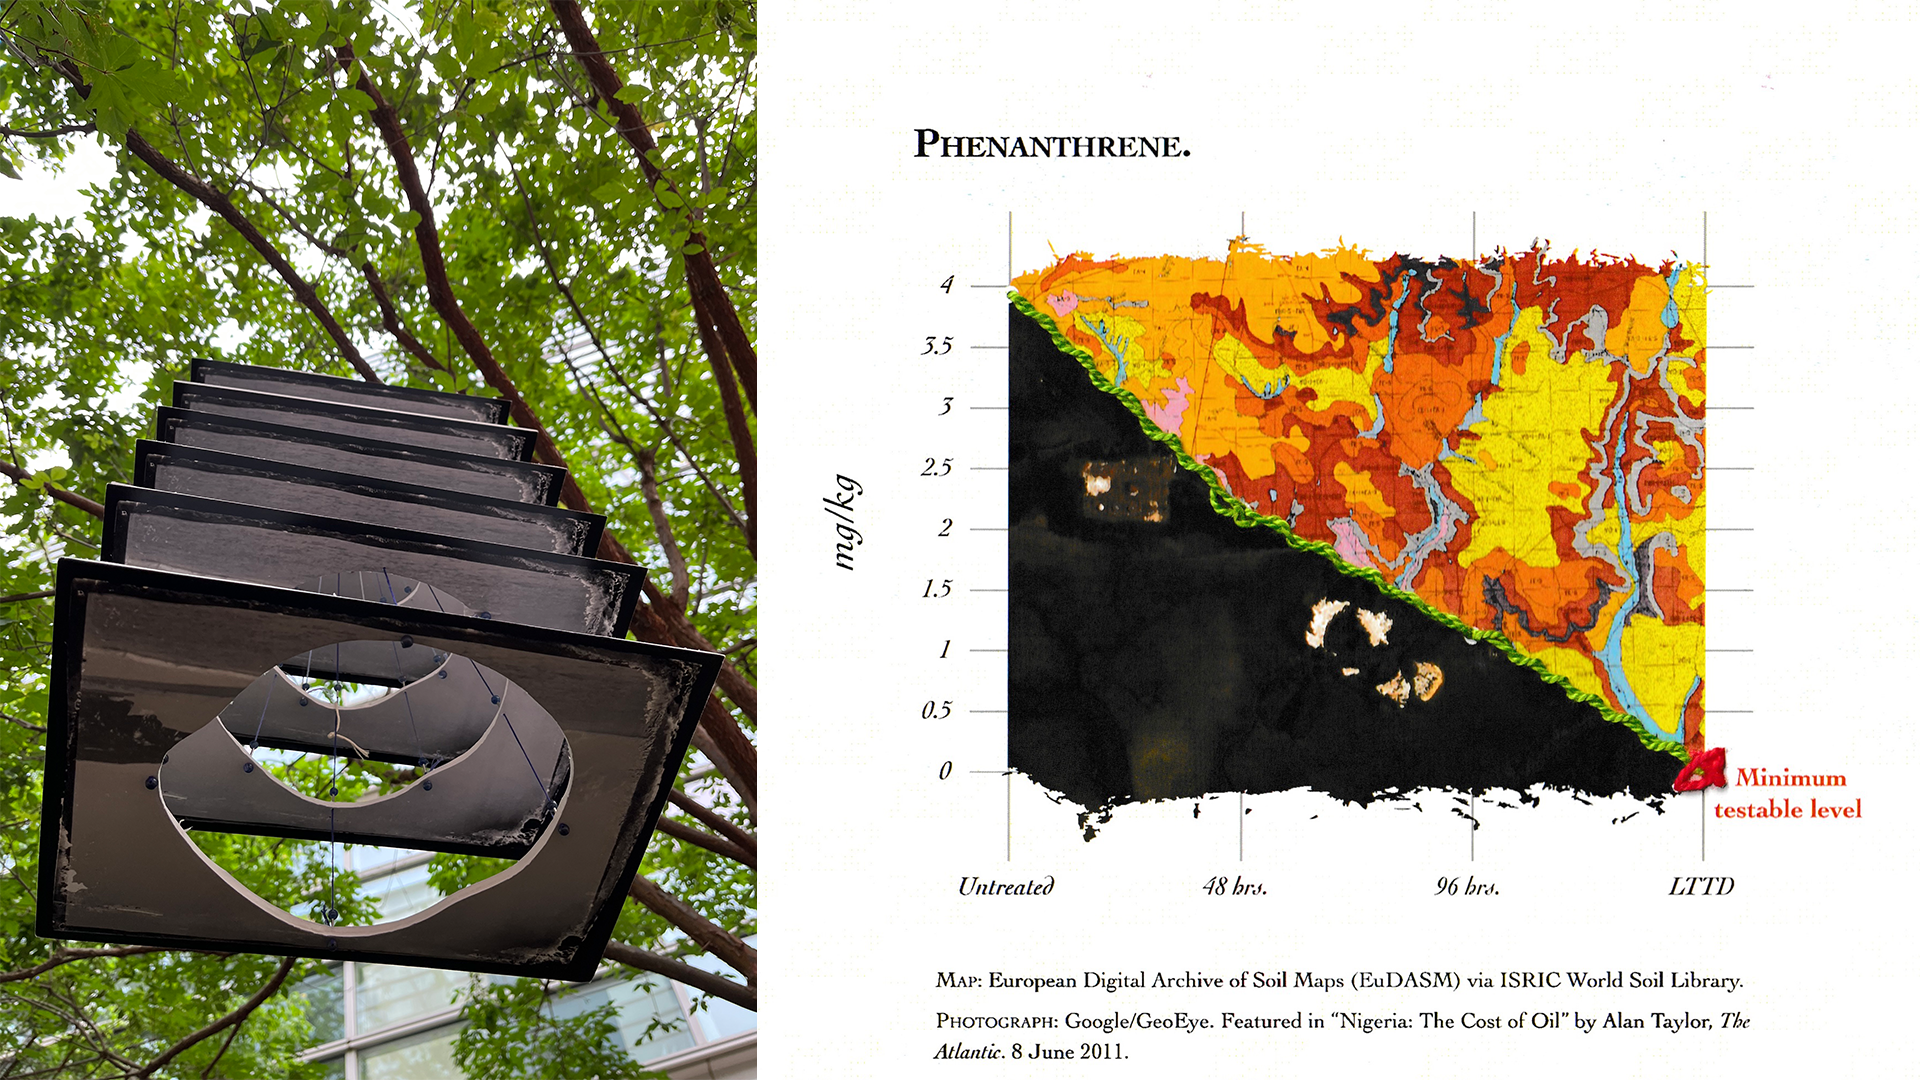 Left: Panels of a black and white photograph of the antartic are suspended from a tree by blue string, with rings in decreasing size corresponding to the size of the hole in the ozone layer. Right: Brightly colored hydrology map is stitched together with a photograph of an illegal oil well in Nigeria. The stitched line forms the data from a bioremediation project to reduce heavy metals in affected areas.